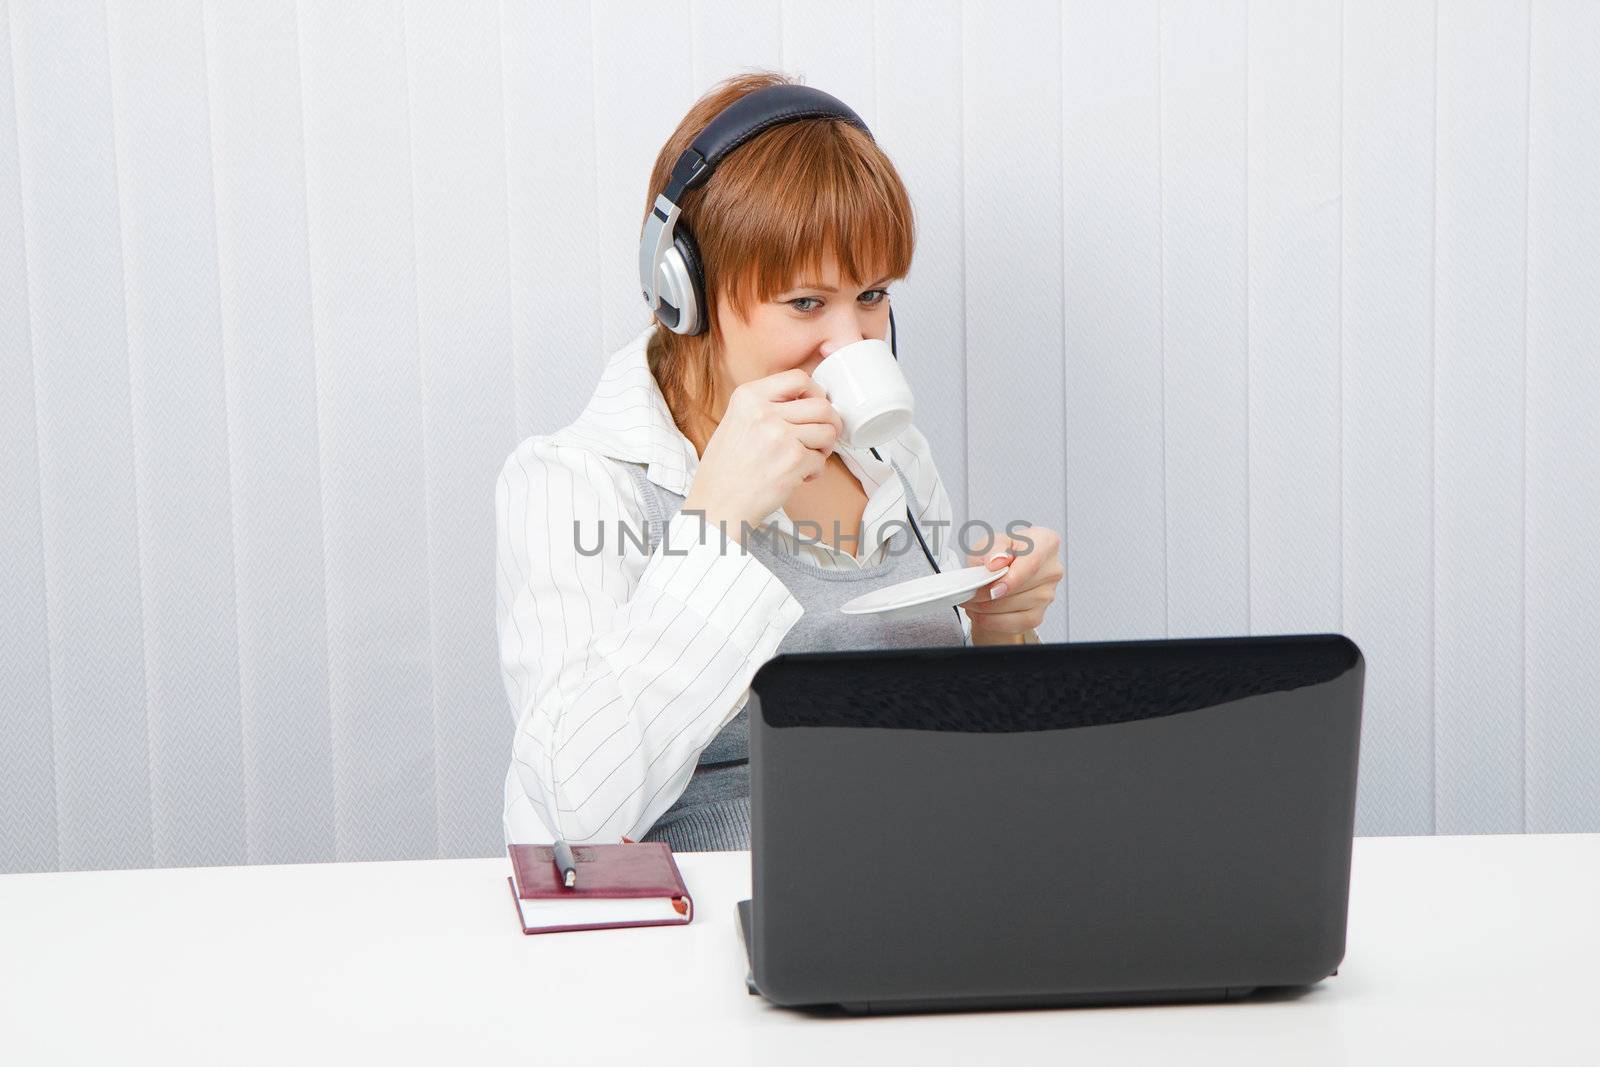 Employee assistance services online. Woman drinks coffee